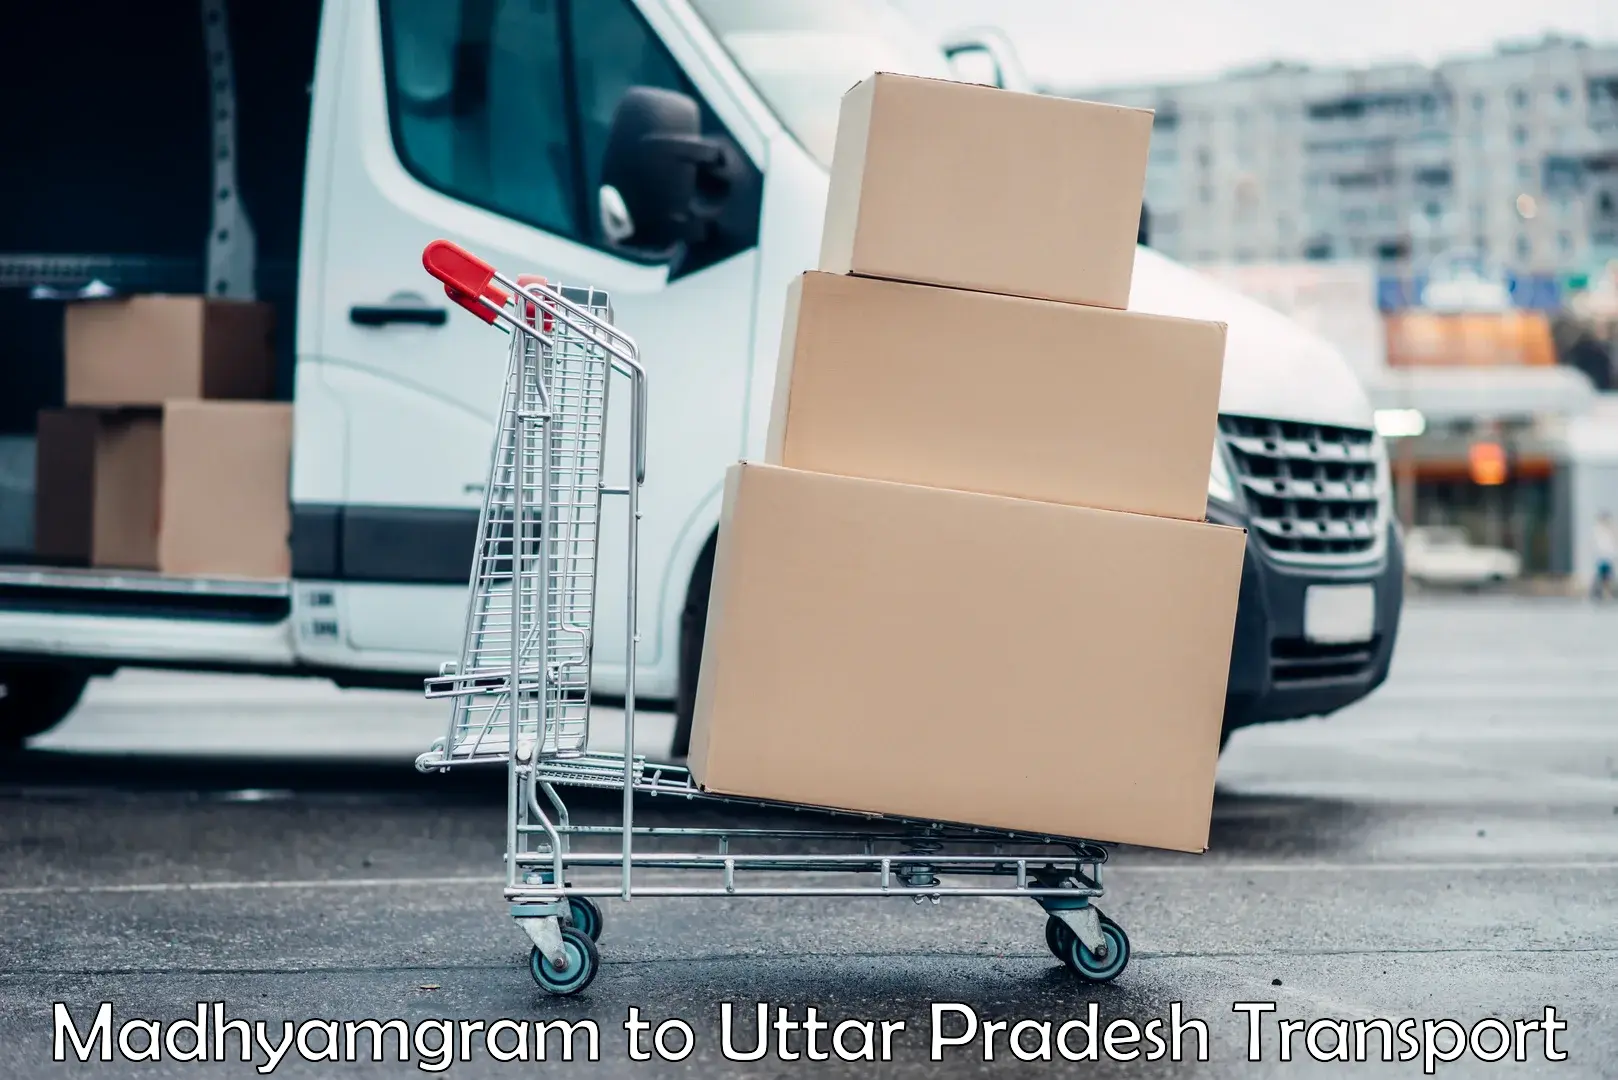 Pick up transport service in Madhyamgram to Mathura